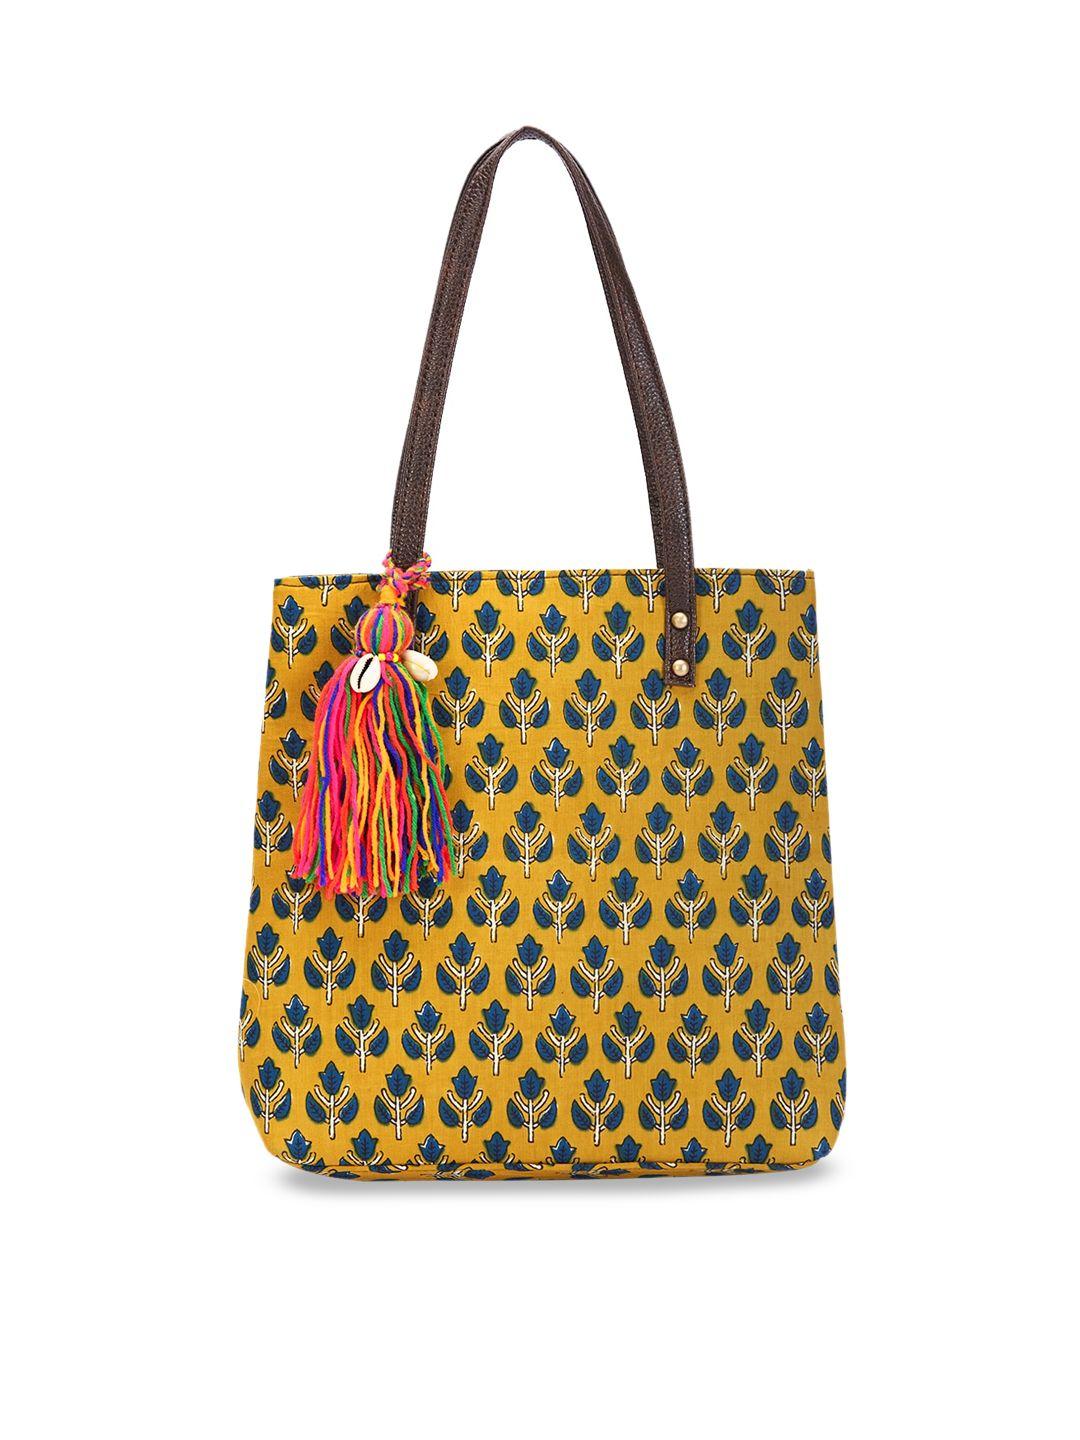 vivinkaa women ethnic motifs printed structured shoulder bag with tasselled